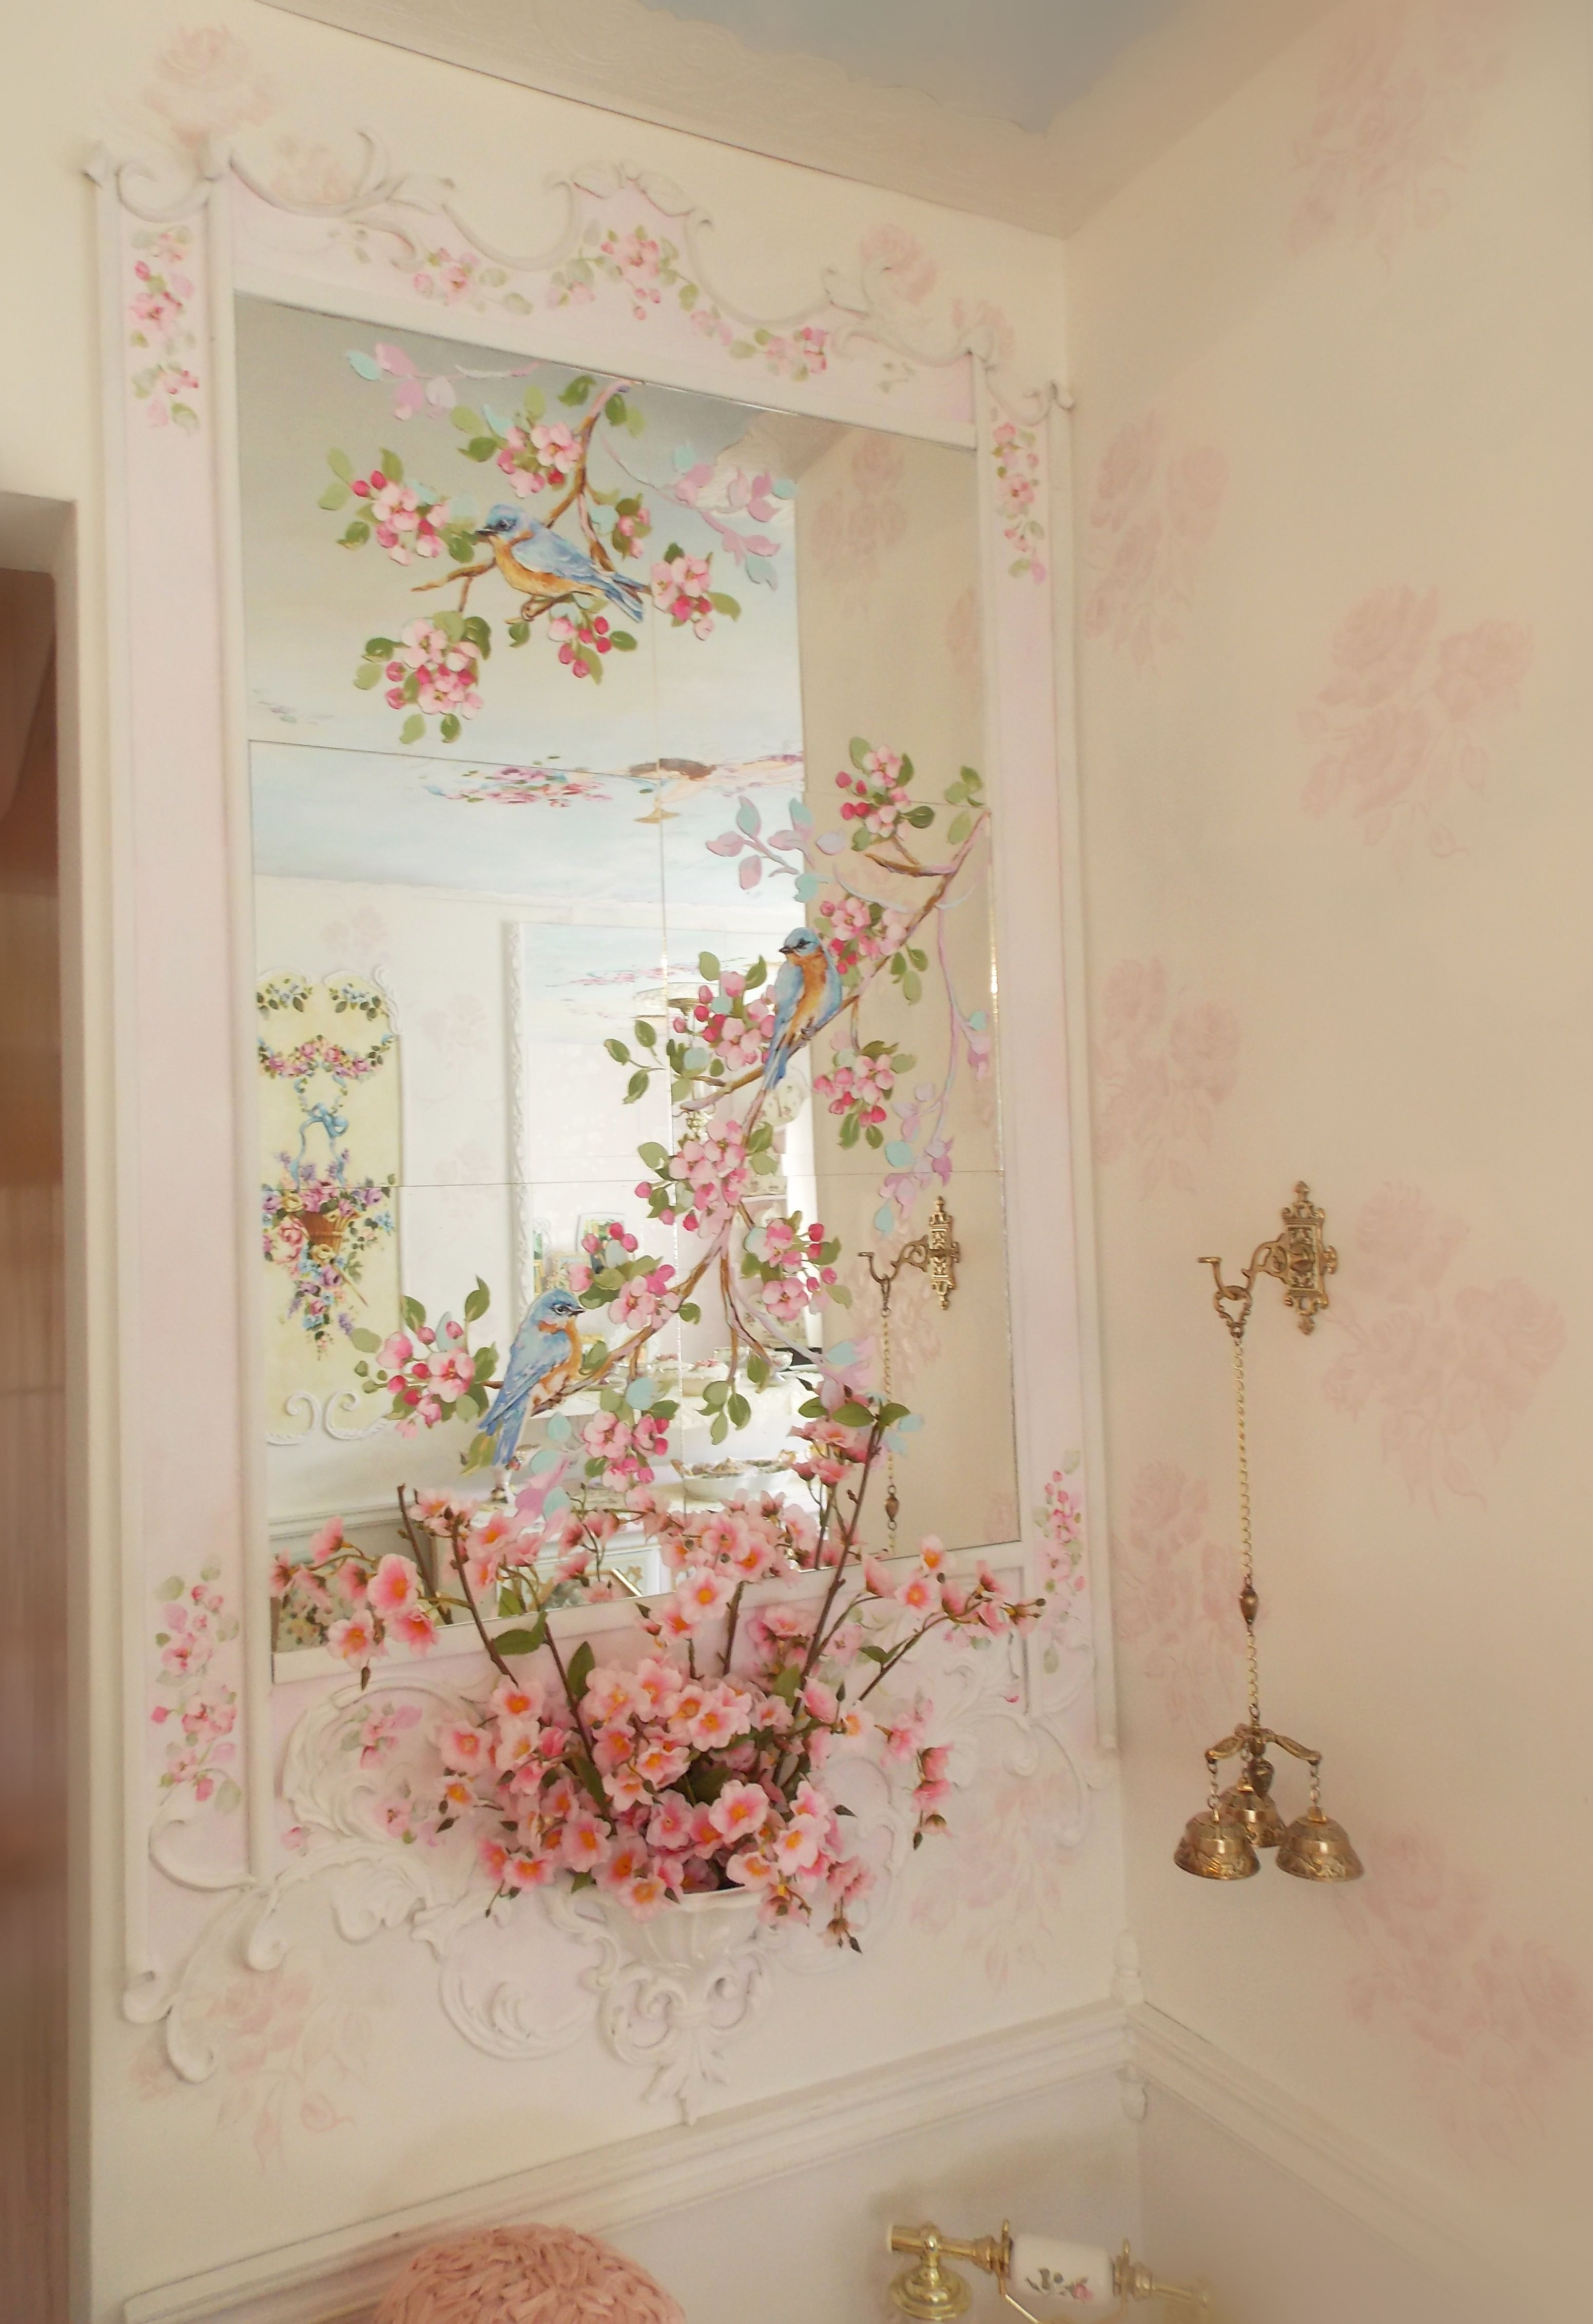 Jonny Petros Mirror Mural Art Rococo Painting Beautiful Living With Shabby Chic Bathroom Mirrors (View 15 of 15)